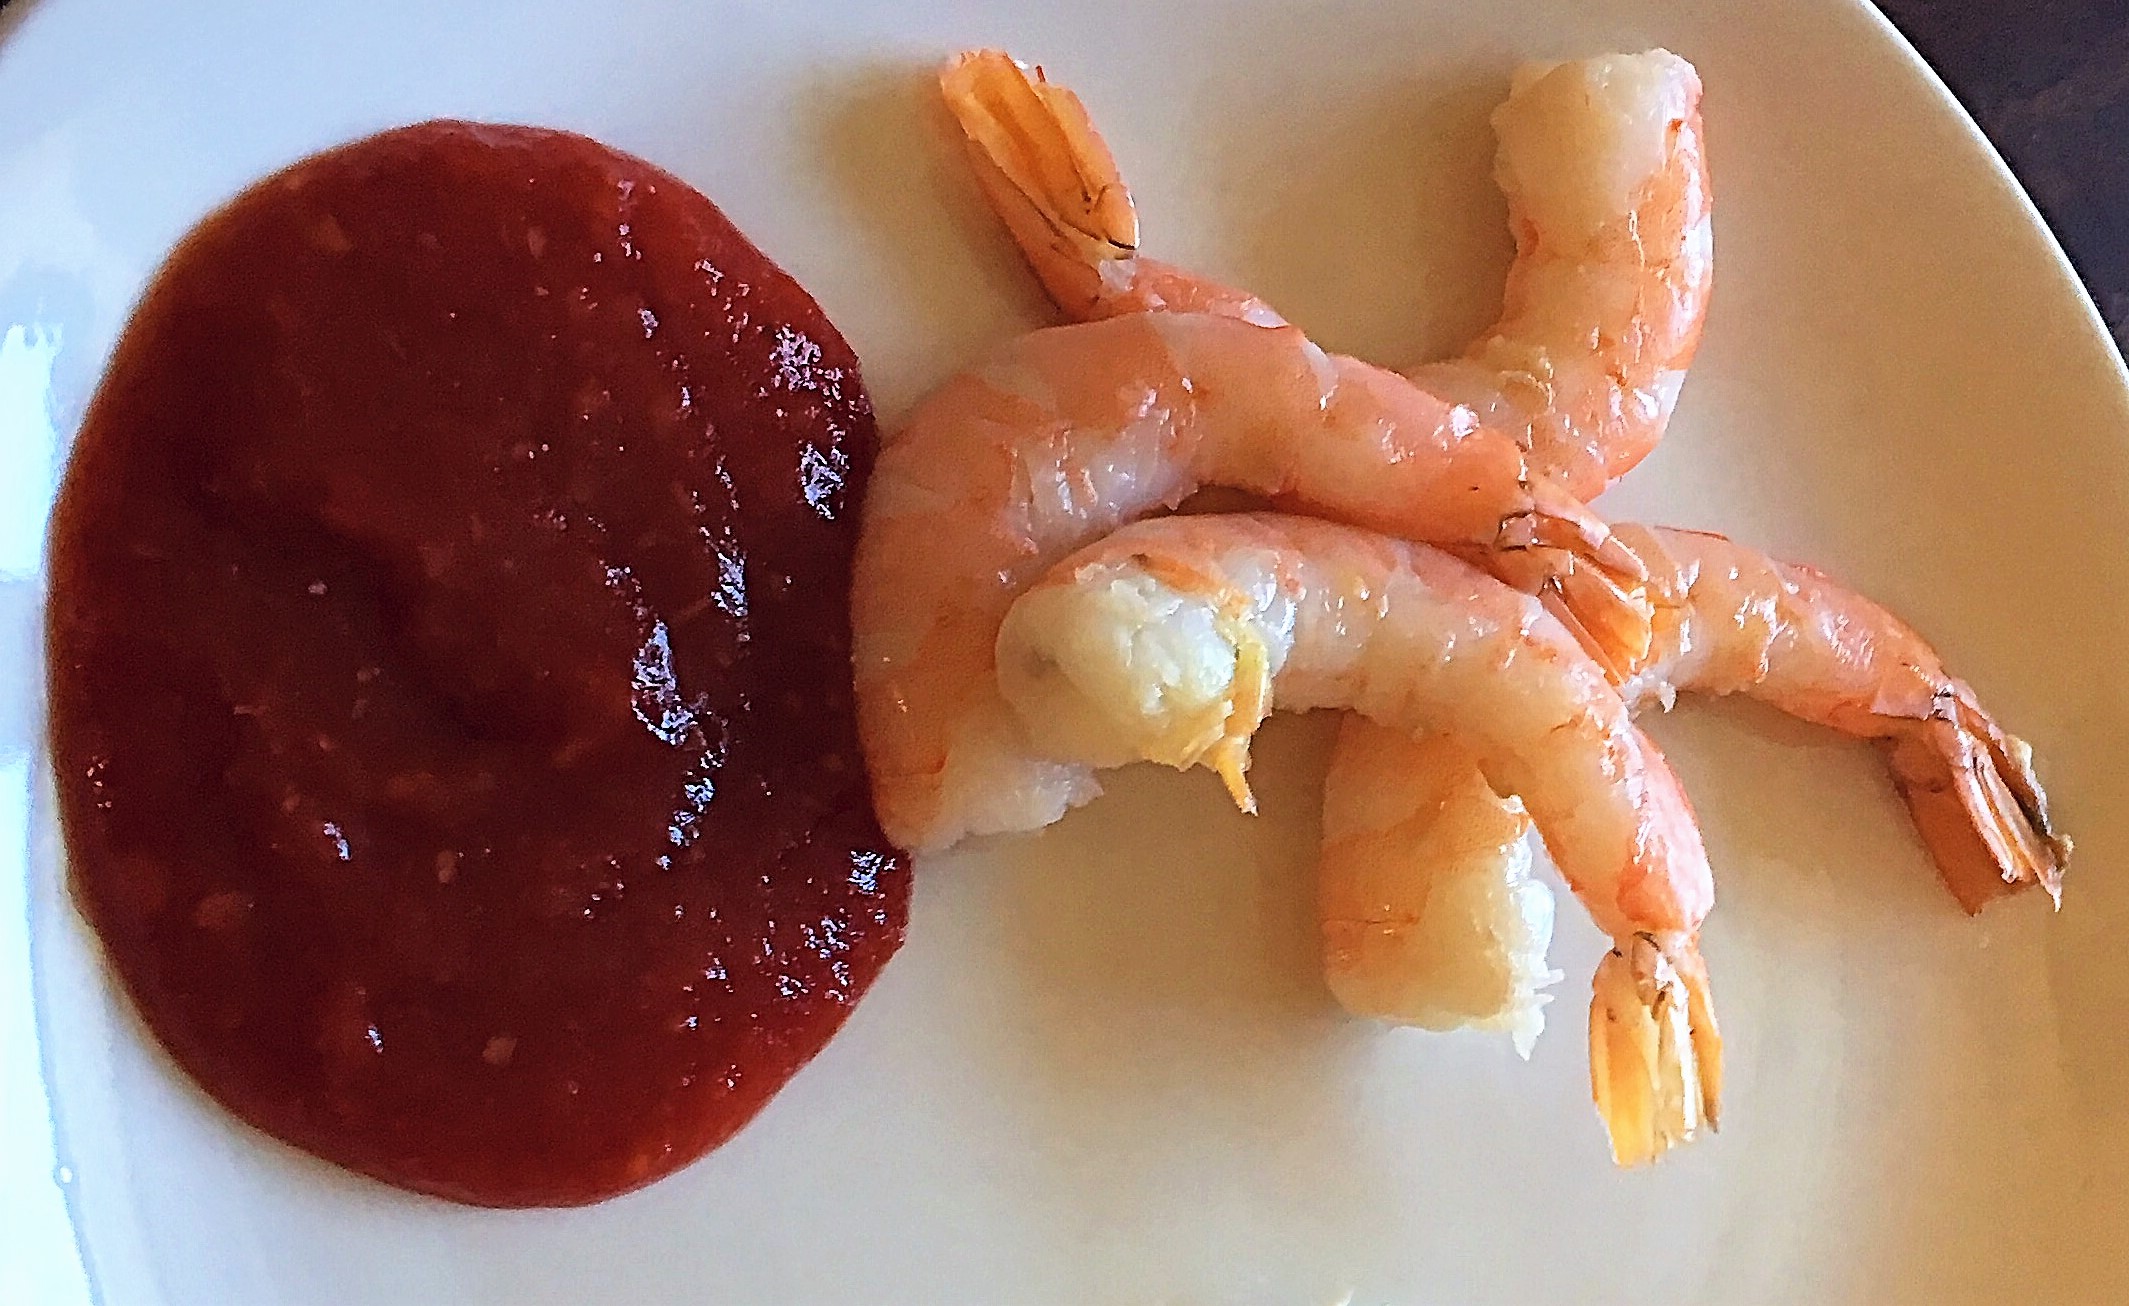 Appetizers: Shrimp Cocktail and Cocktail Sauce